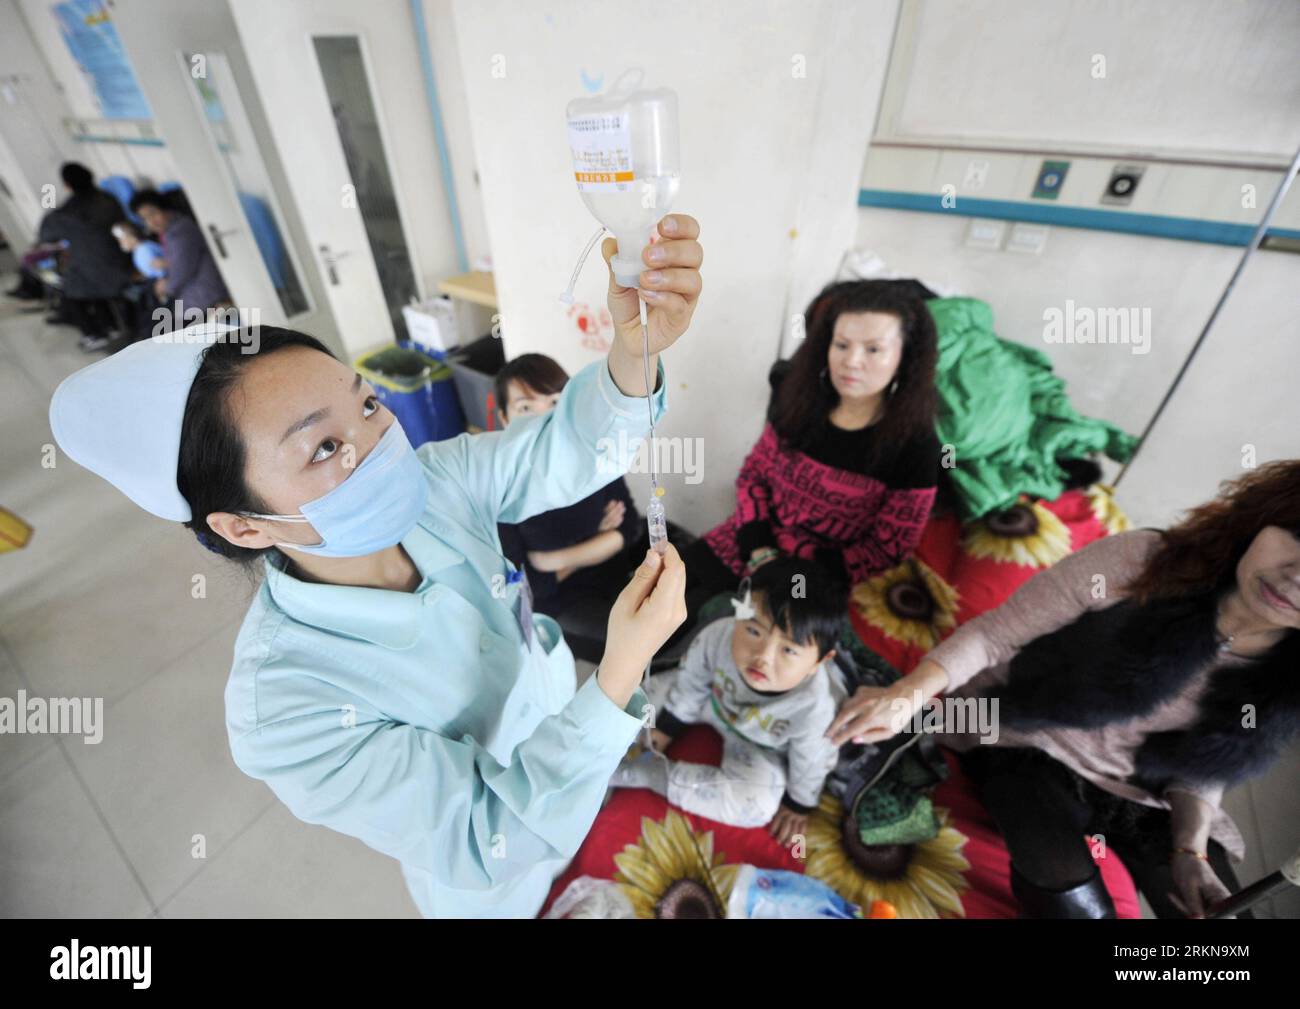 Bildnummer: 57060052  Datum: 12.02.2012  Copyright: imago/Xinhua (120212) -- YINCHUAN, Feb. 12, 2012 (Xinhua) -- A nurse takes care of a child at Yinchuan Maternal and Children Health Hospital in Yinchuan, captial of northwest China s Ningxia Hui Autonomous Region, Feb. 12, 2012. Many children caught cold due to sharp temperture decline, rendering the number of children getting infusion to almost 300 per day in the hospital. (Xinhua/Peng Zhaozhi) (zc) CHINA-YINCHUAN-CHILDREN-INFUSION (CN) PUBLICATIONxNOTxINxCHN Gesellschaft Gesundheit medizinische Versorgung Kinder krank Erkältung Kälte Winter Stock Photo